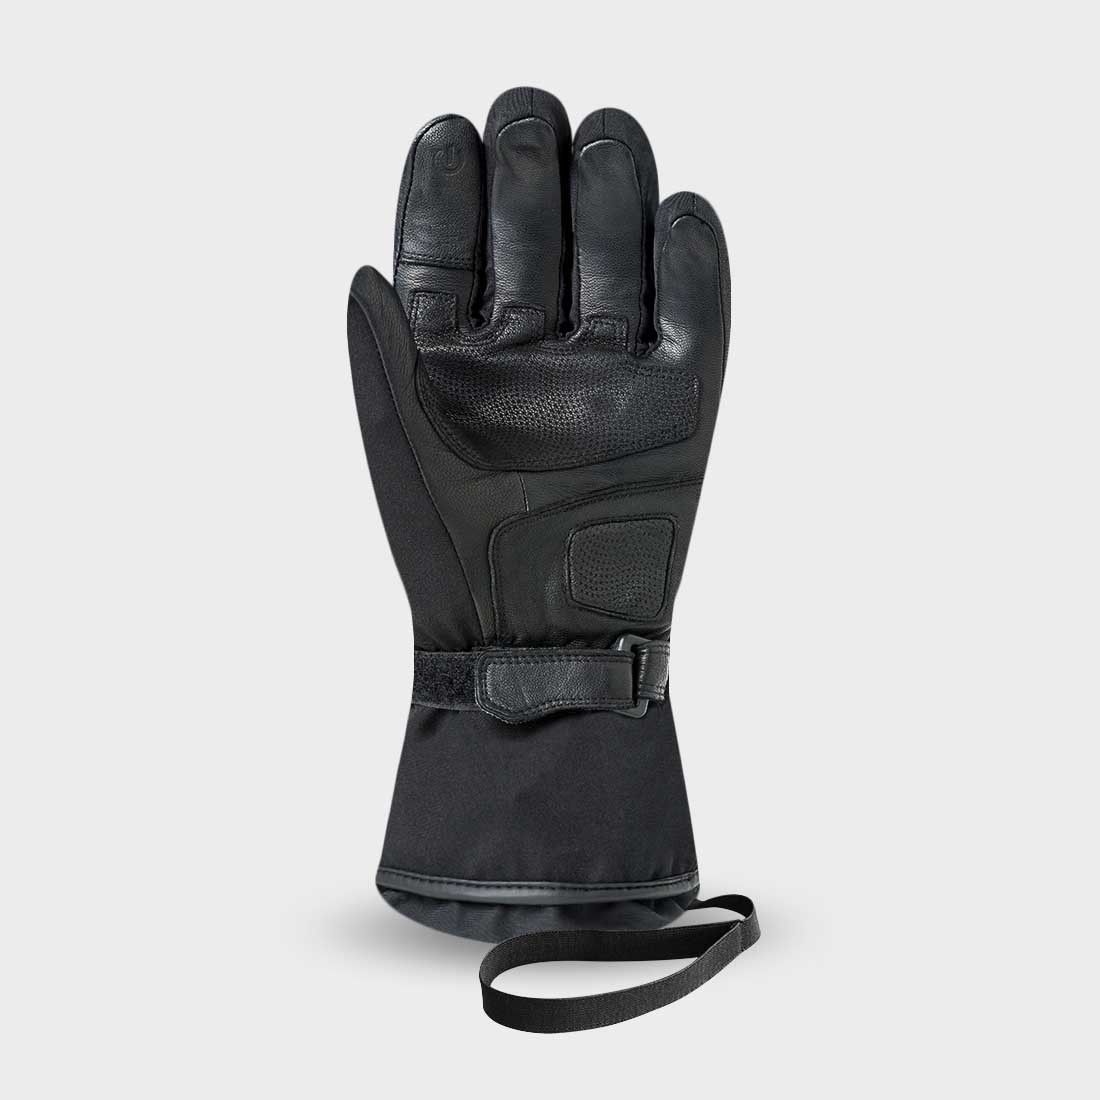 RACER CONNECTIC 4 - Heated gloves